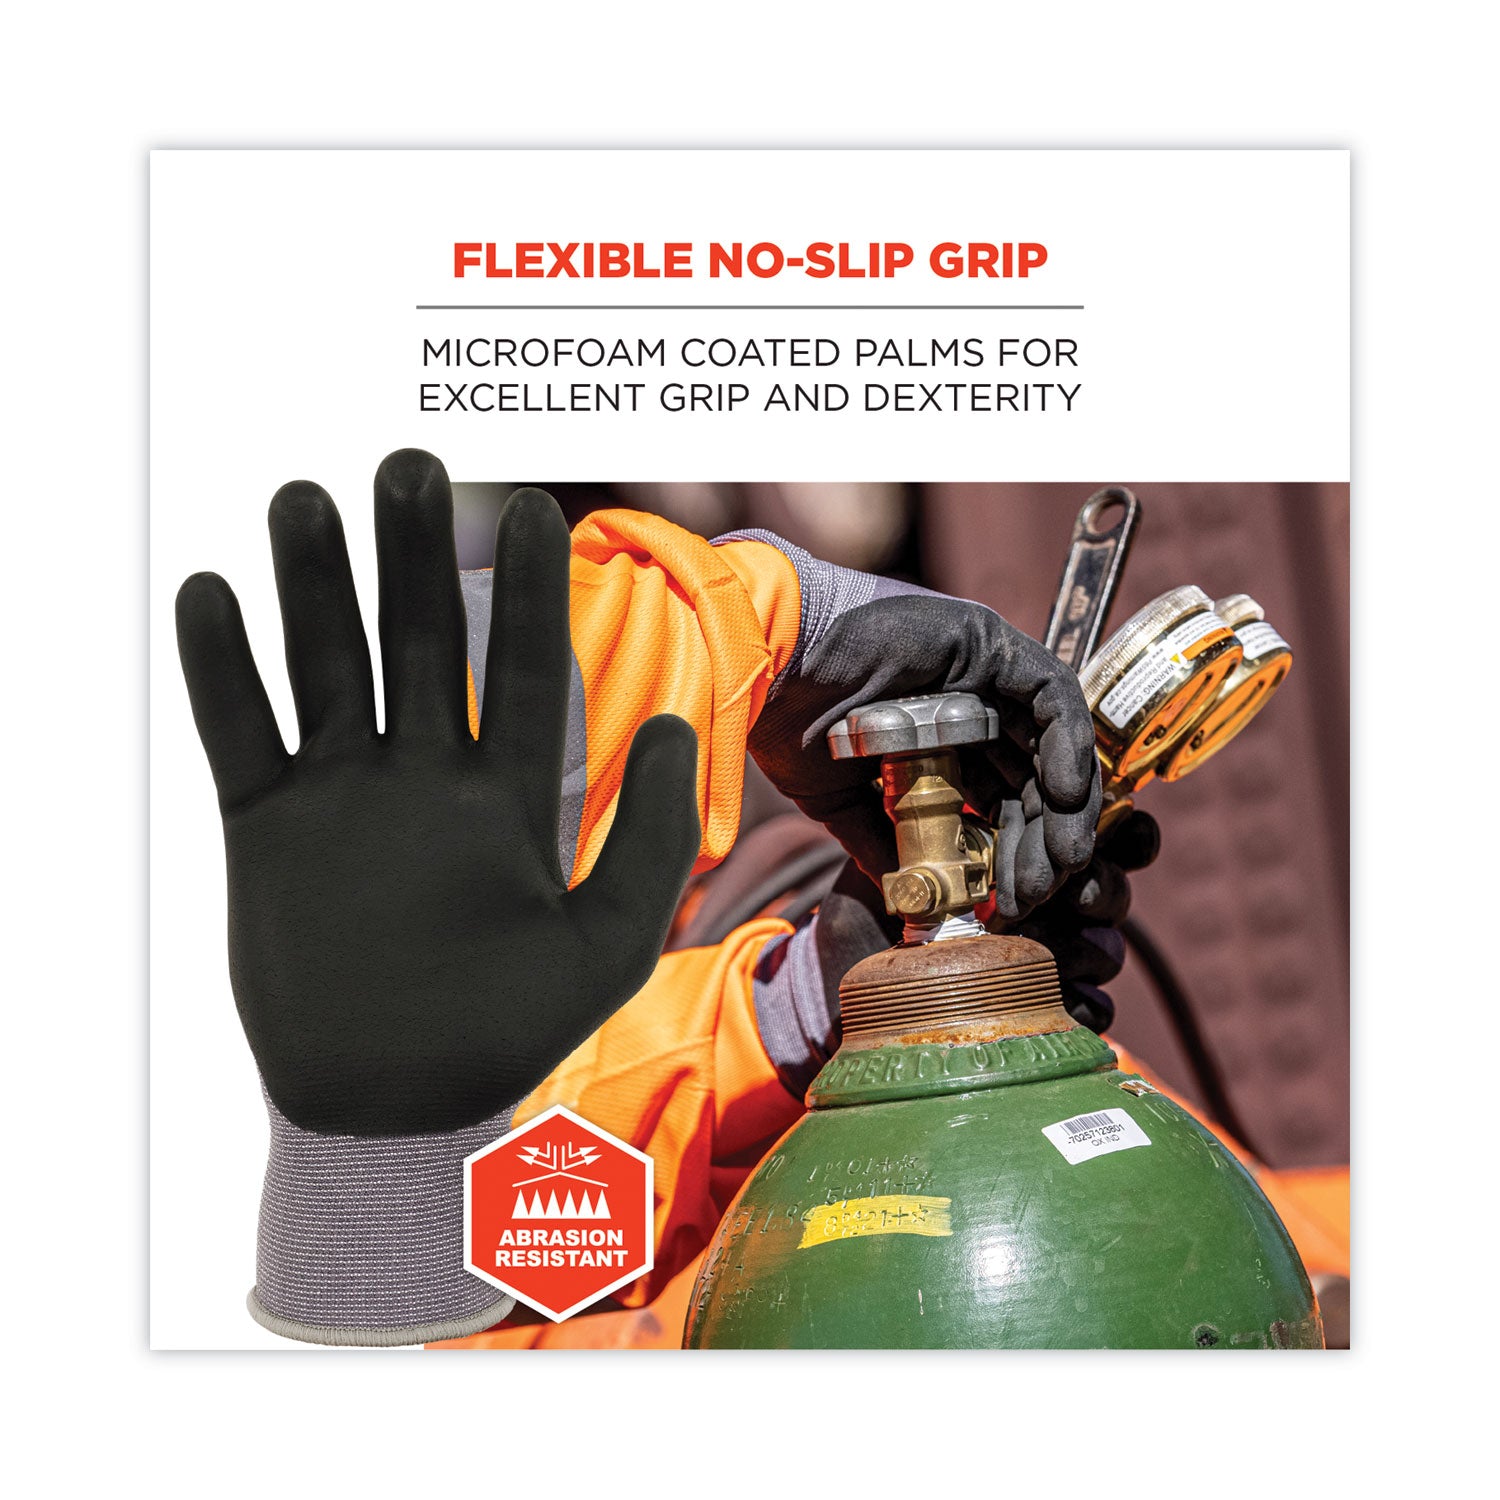 proflex-7000-nitrile-coated-gloves-microfoam-palm-gray-small-pair-ships-in-1-3-business-days_ego10372 - 2